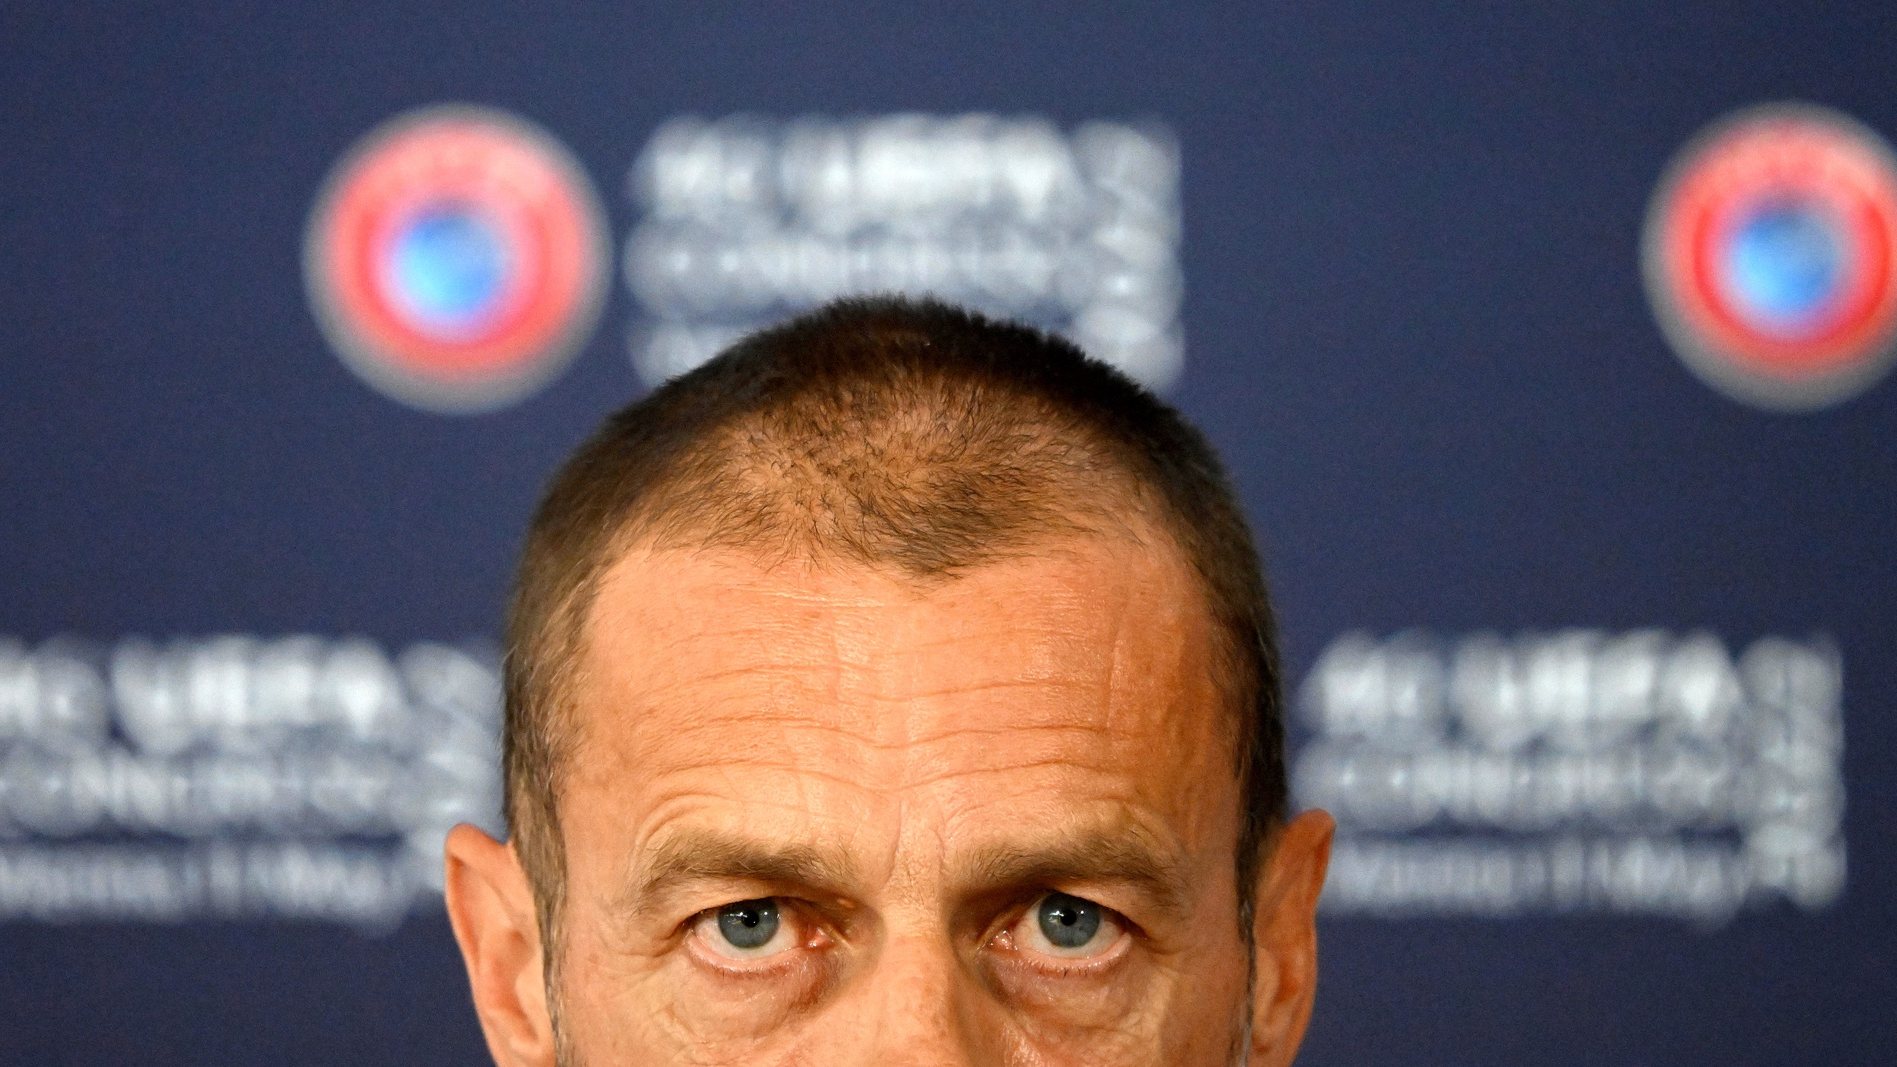 epa09939701 UEFA president Aleksander Ceferin looks on during a press conferences following the 46th Ordinary UEFA Congress in Vienna, Austria, 11 May 2022. The UEFA Executive Committee on 10 May approved the final format for the European club competitions as of the 2024/25 season. The key points for the flagship competition, the UEFA Champions League, are no more access granted based on club coefficients, eight matches instead of ten in the new league phase, an increase from 32 to 36 teams and the criteria for the allocation of the four additional places in the UEFA Champions League.  EPA/CHRISTIAN BRUNA